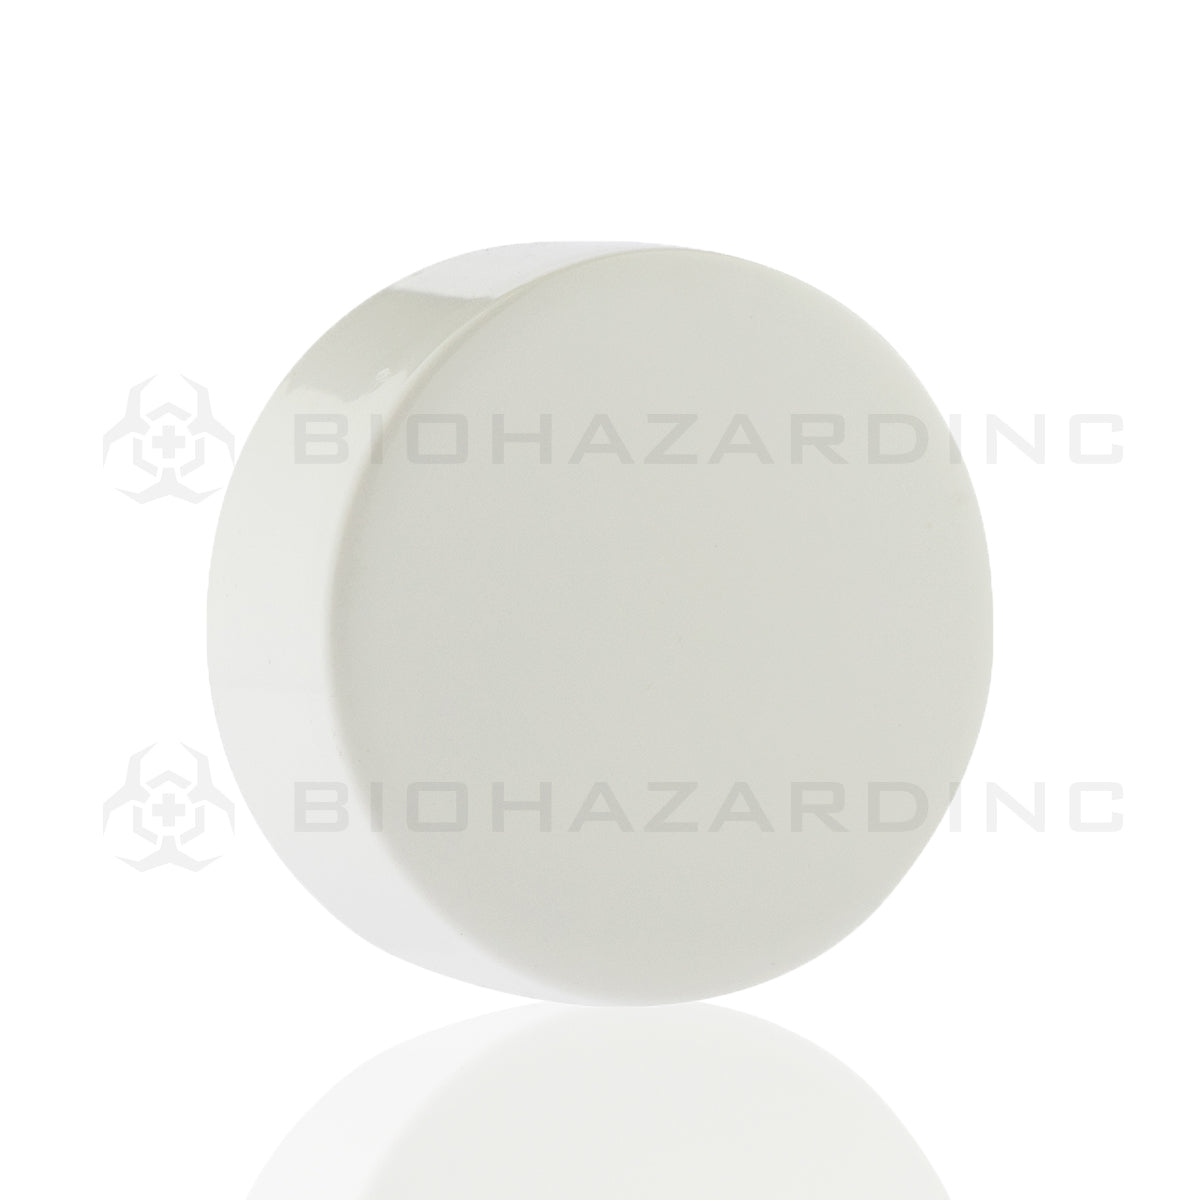 Child Resistant | Smooth Push Down & Turn Plastic Foil Lined Caps | 38mm - Gloss White - 80 Count Child Resistant Cap Biohazard Inc   